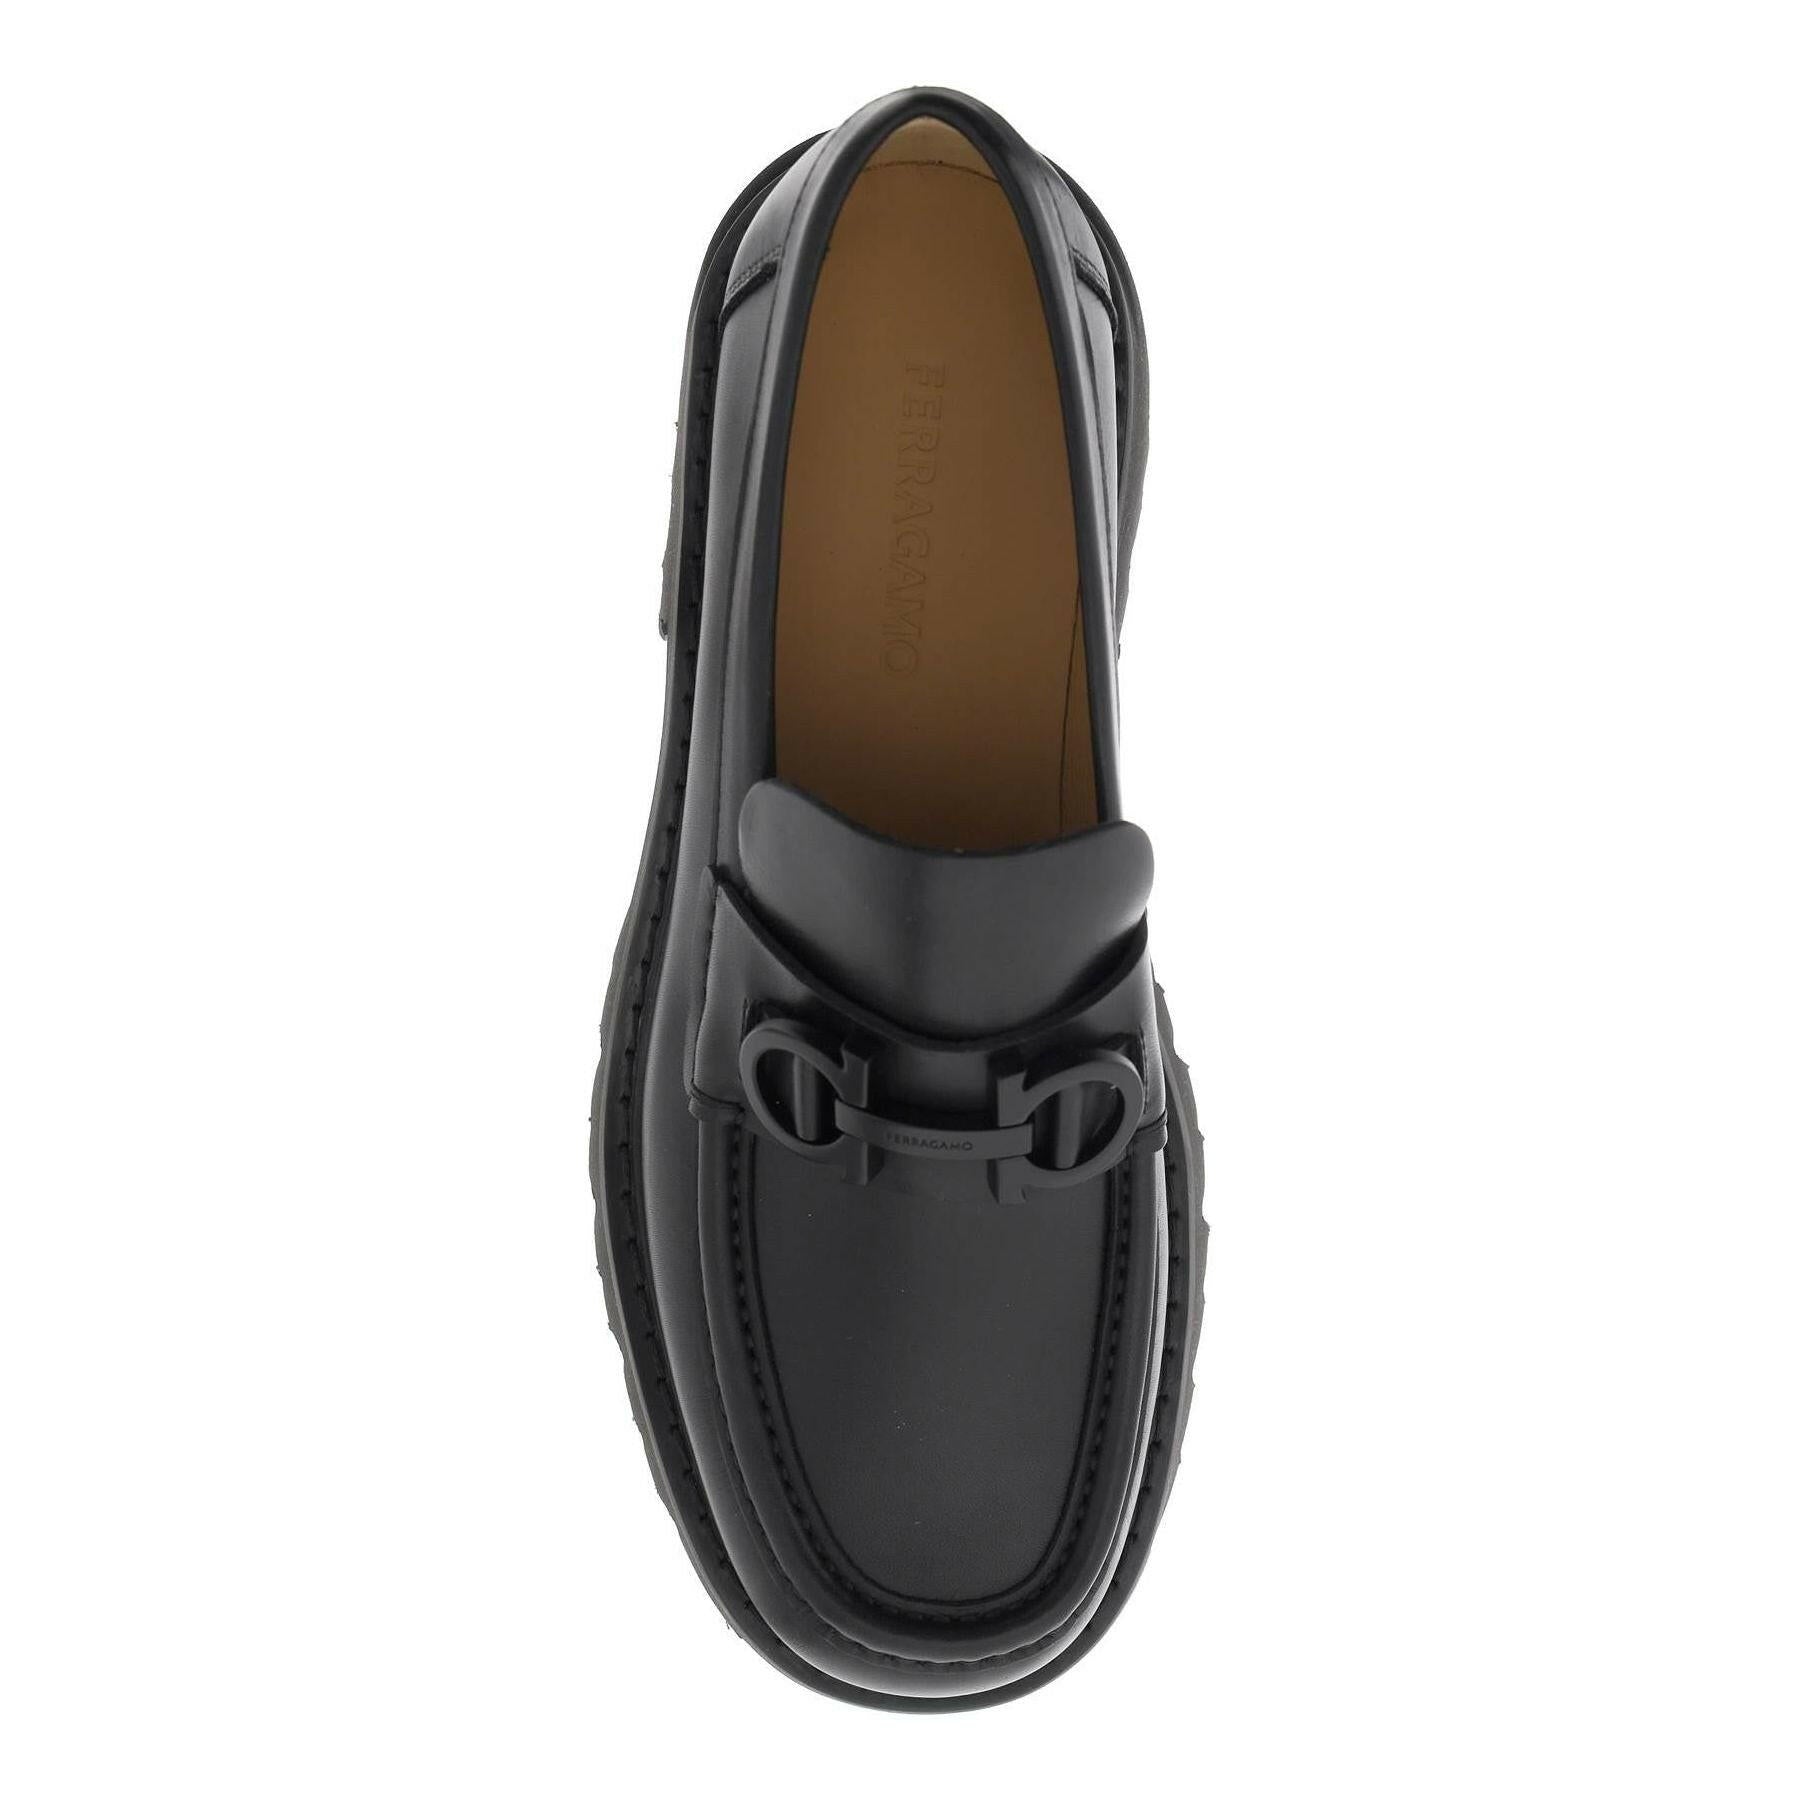 Florian Gancini Leather Loafers